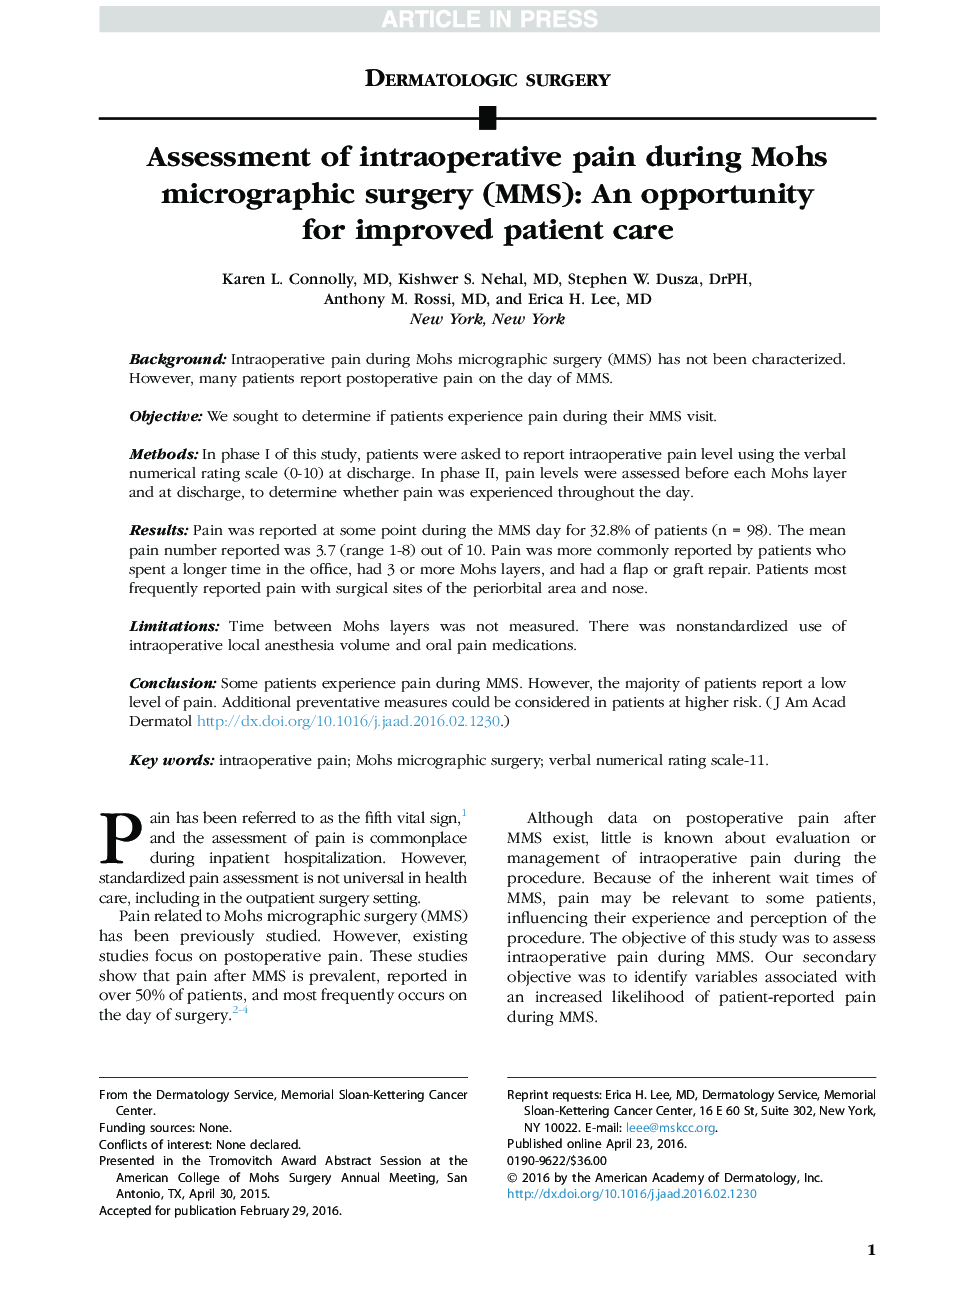 Assessment of intraoperative pain during Mohs micrographic surgery (MMS): An opportunity for improved patient care